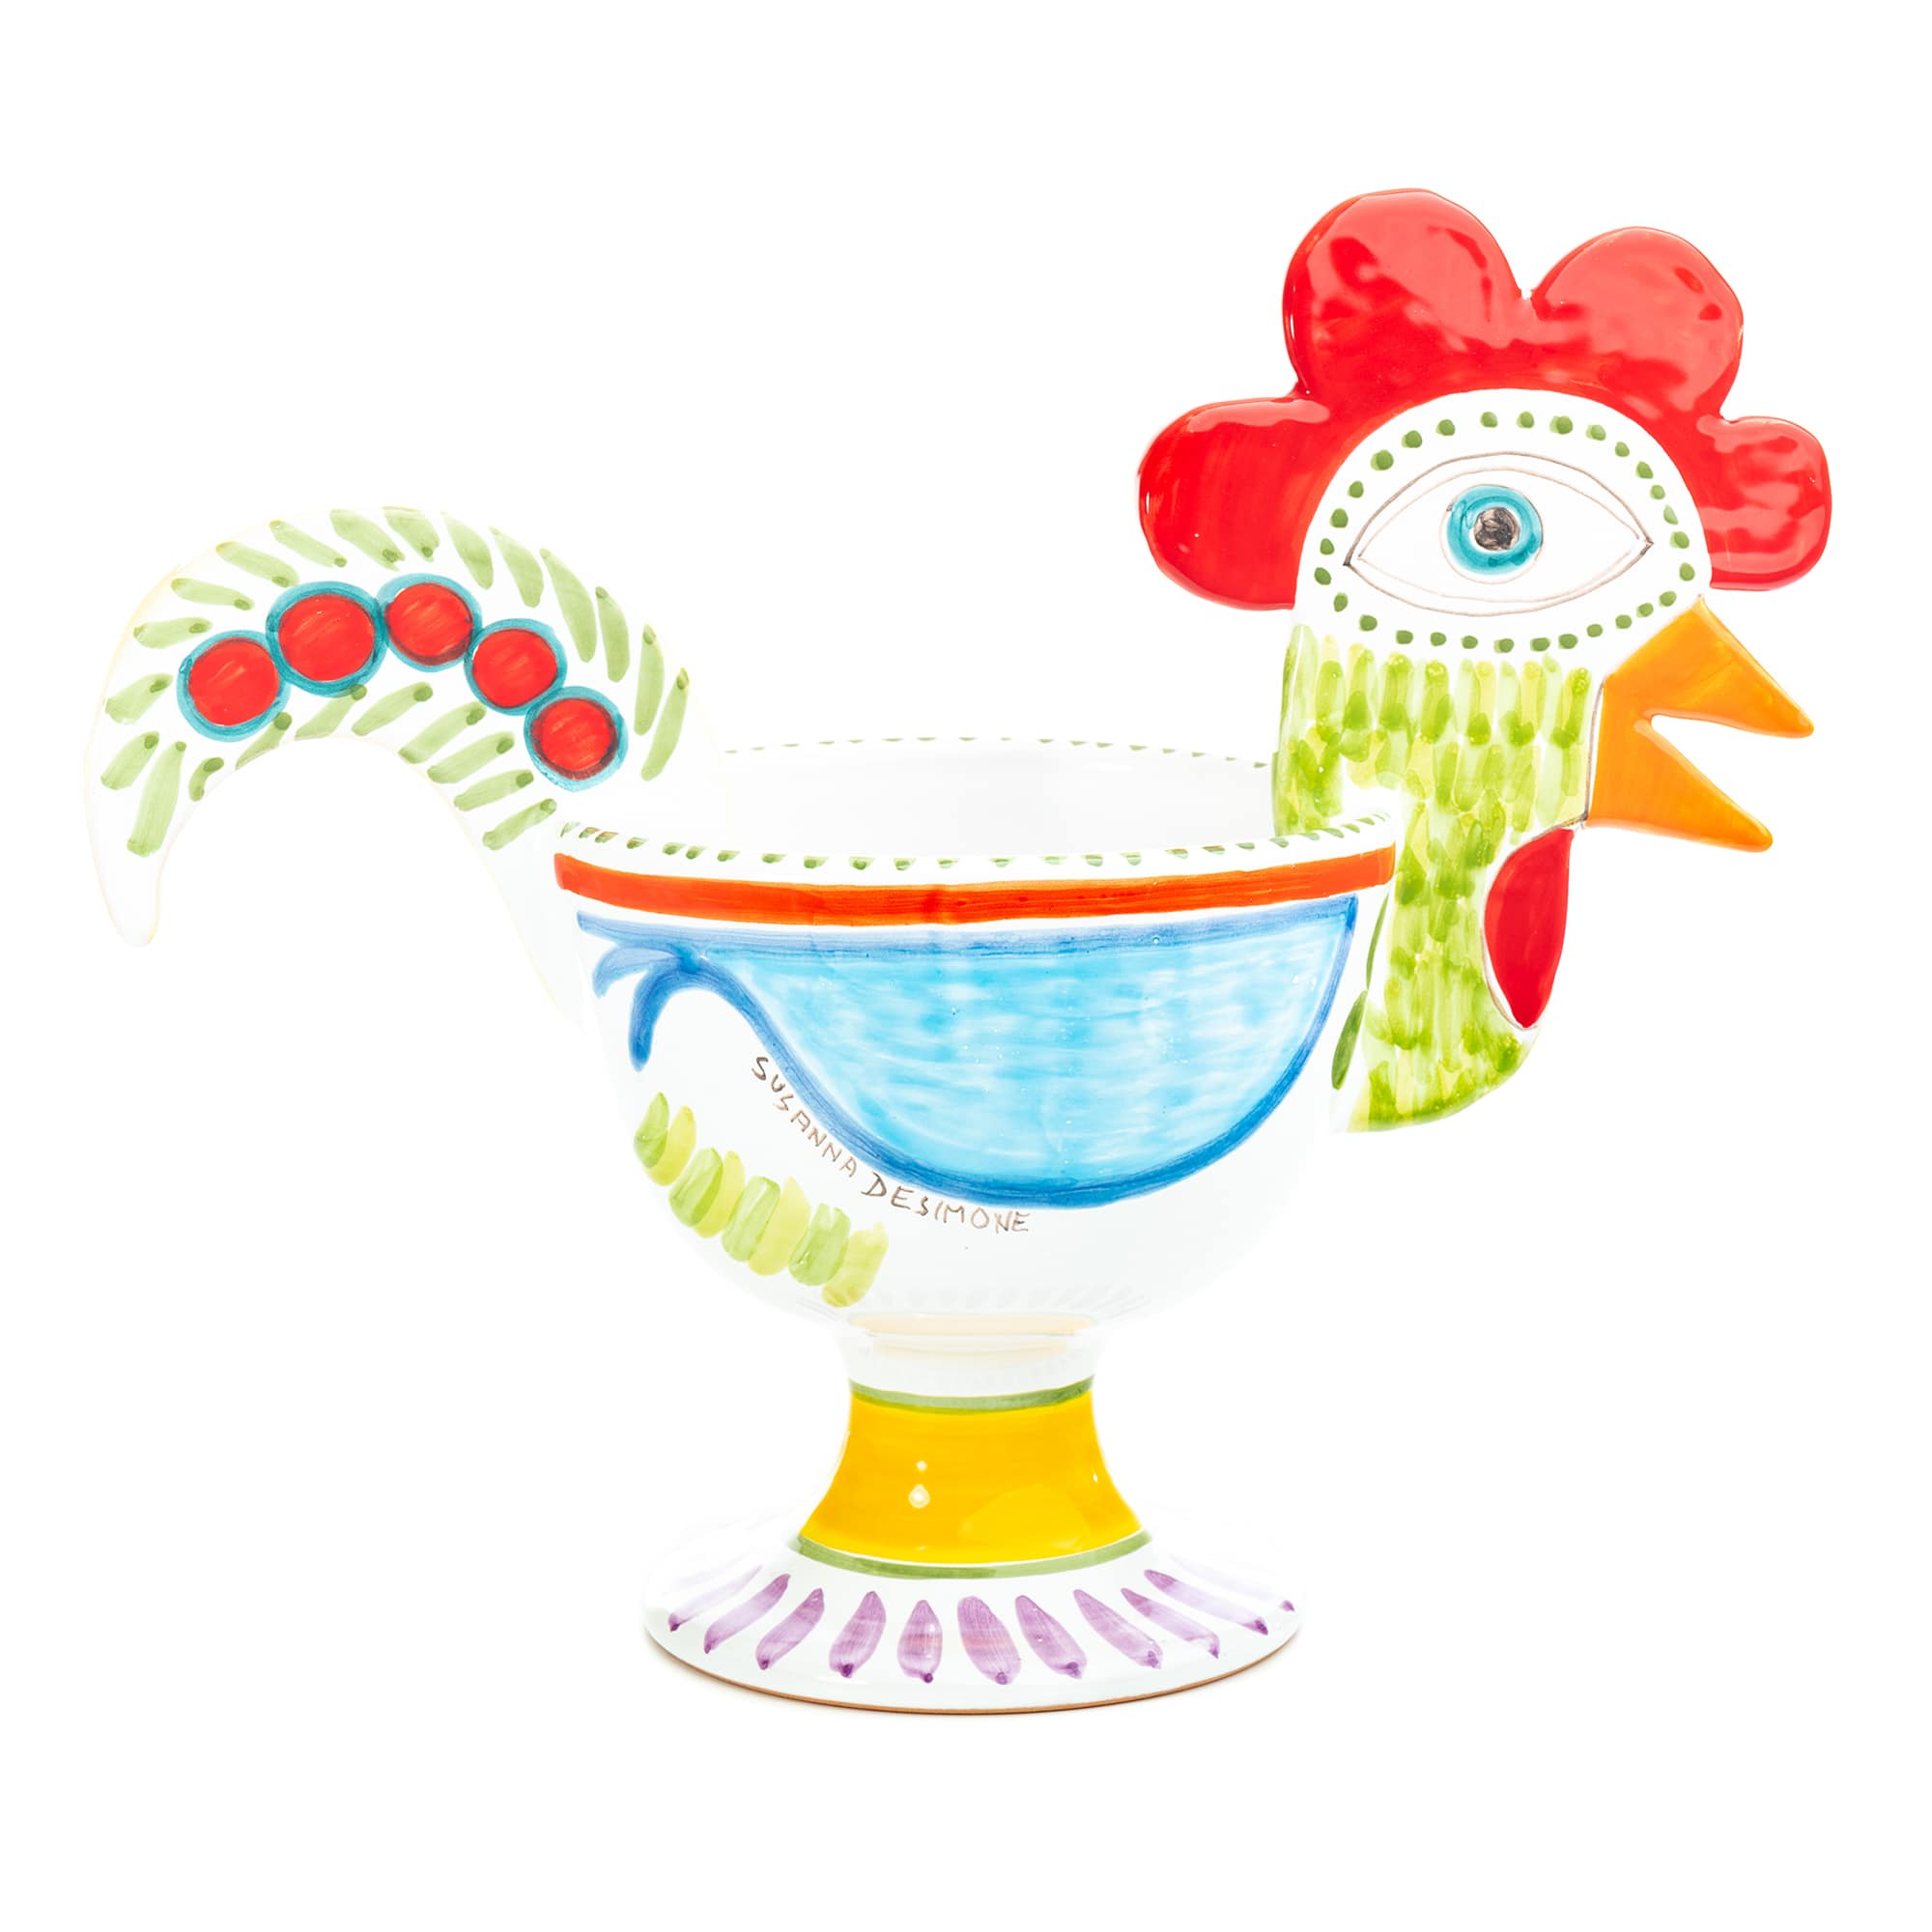 Rooster Cachepot, Large Size, ceramics, pottery, italian design, majolica, handmade, handcrafted, handpainted, home decor, kitchen art, home goods, deruta, majolica, Artisan, treasures, traditional art, modern art, gift ideas, style, SF, shop small business, artists, shop online, landmark store, legacy, one of a kind, limited edition, gift guide, gift shop, retail shop, decorations, shopping, italy, home staging, home decorating, home interiors